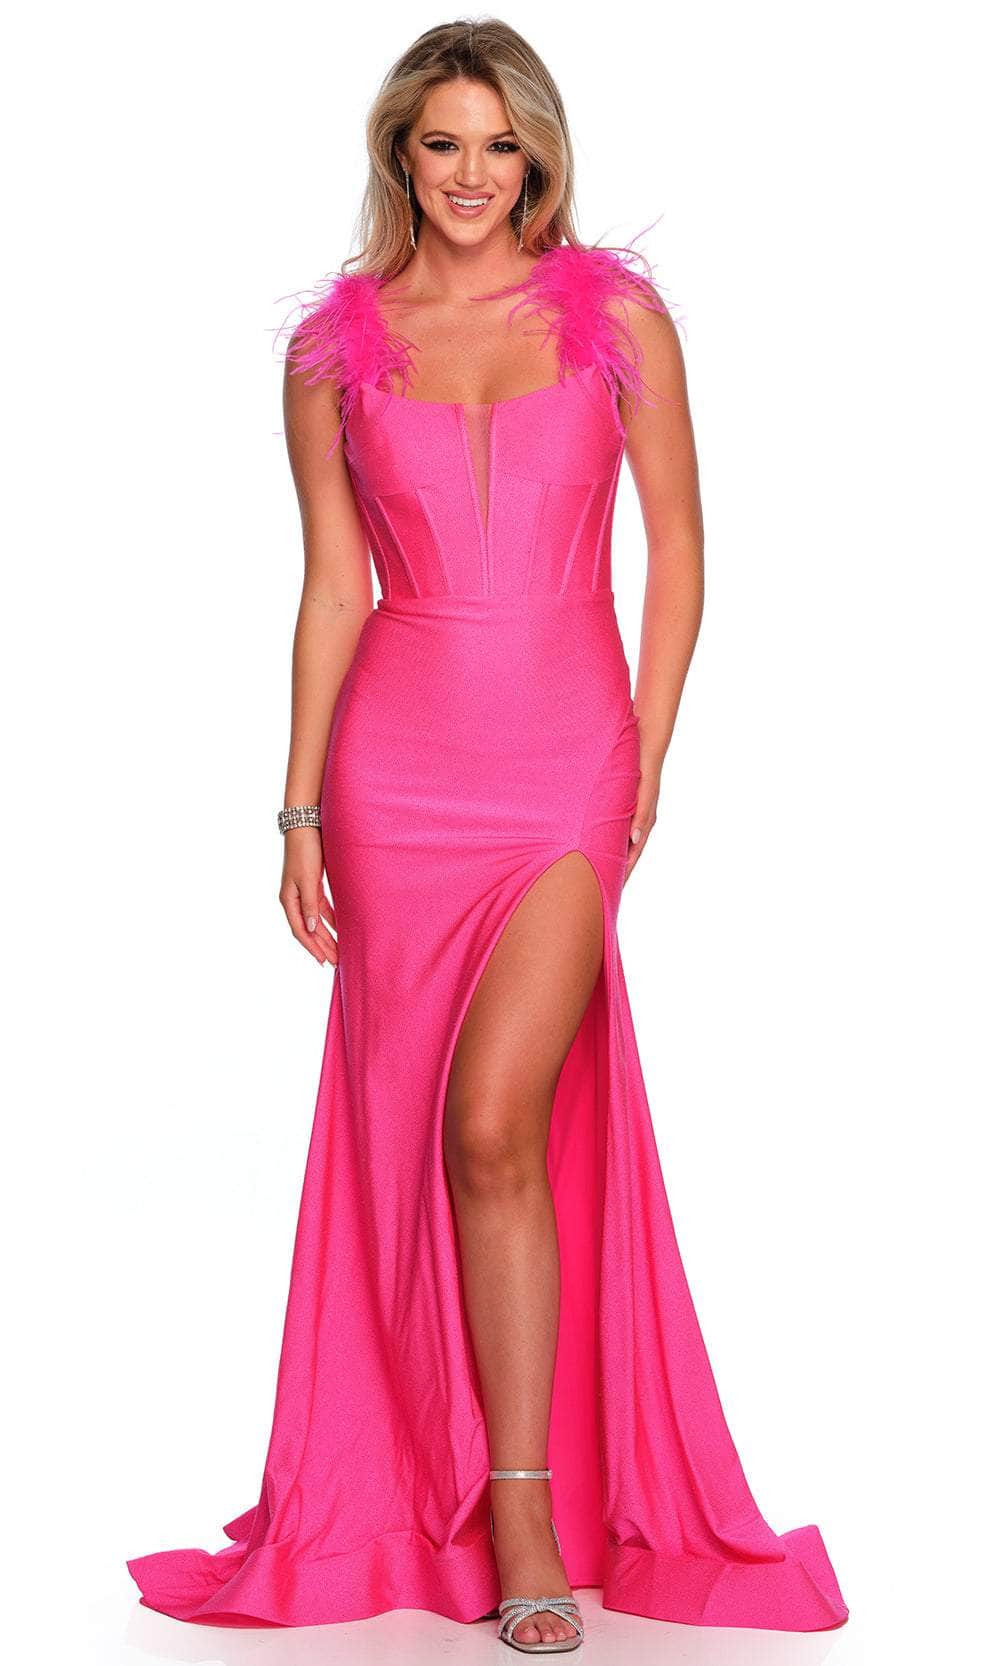 Image of Dave & Johnny 11392 - Feather Embellished Corset Bodice Prom Gown